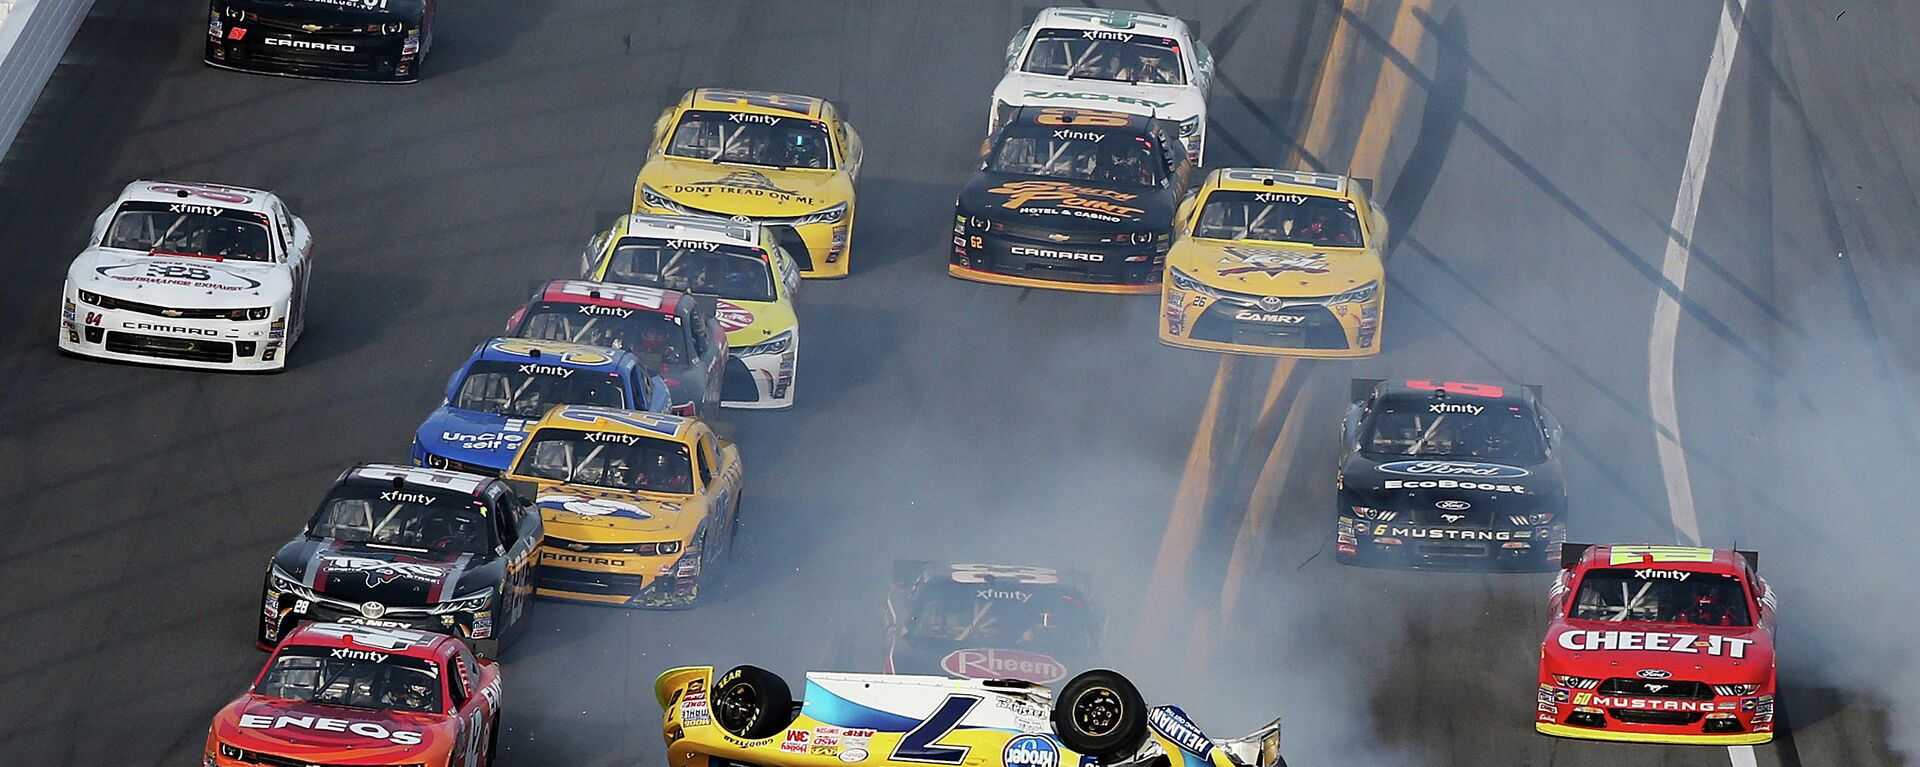 Regan Smith, driver of the #7 Hellmann's Chevrolet, flips over during an on-track incident during the NASCAR XFINITY Series Alert Today Florida 300 at Daytona International Speedway on February 21, 2015 in Daytona Beach, Florida - Sputnik International, 1920, 20.12.2022